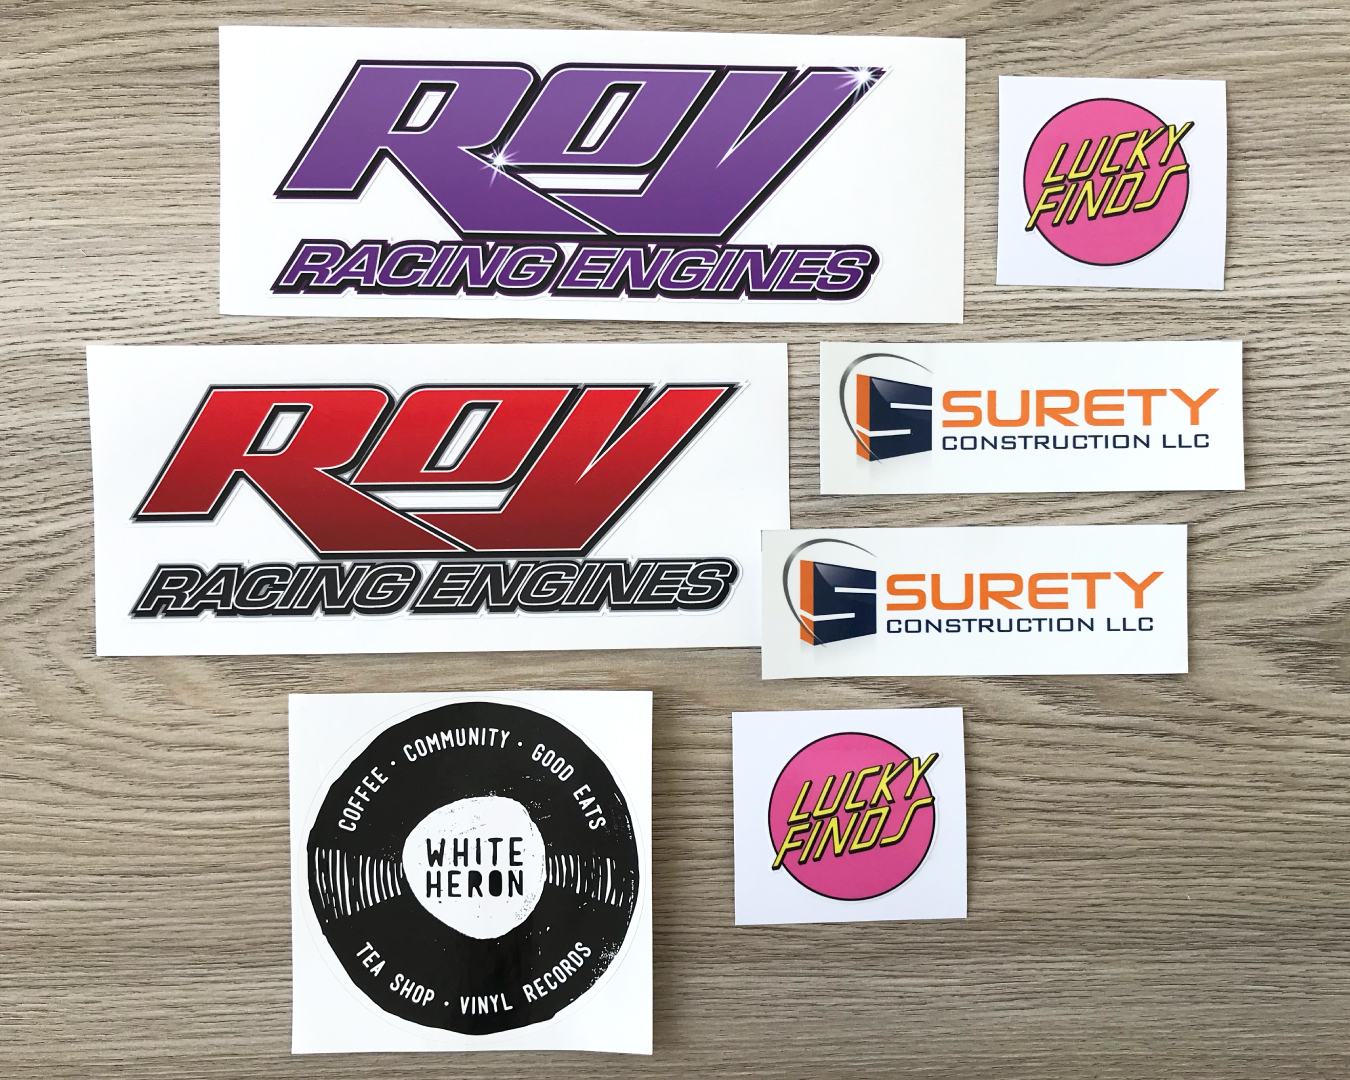 Custom cut stickers for Seacoast NH businesses by Alphagraphics Portsmouth